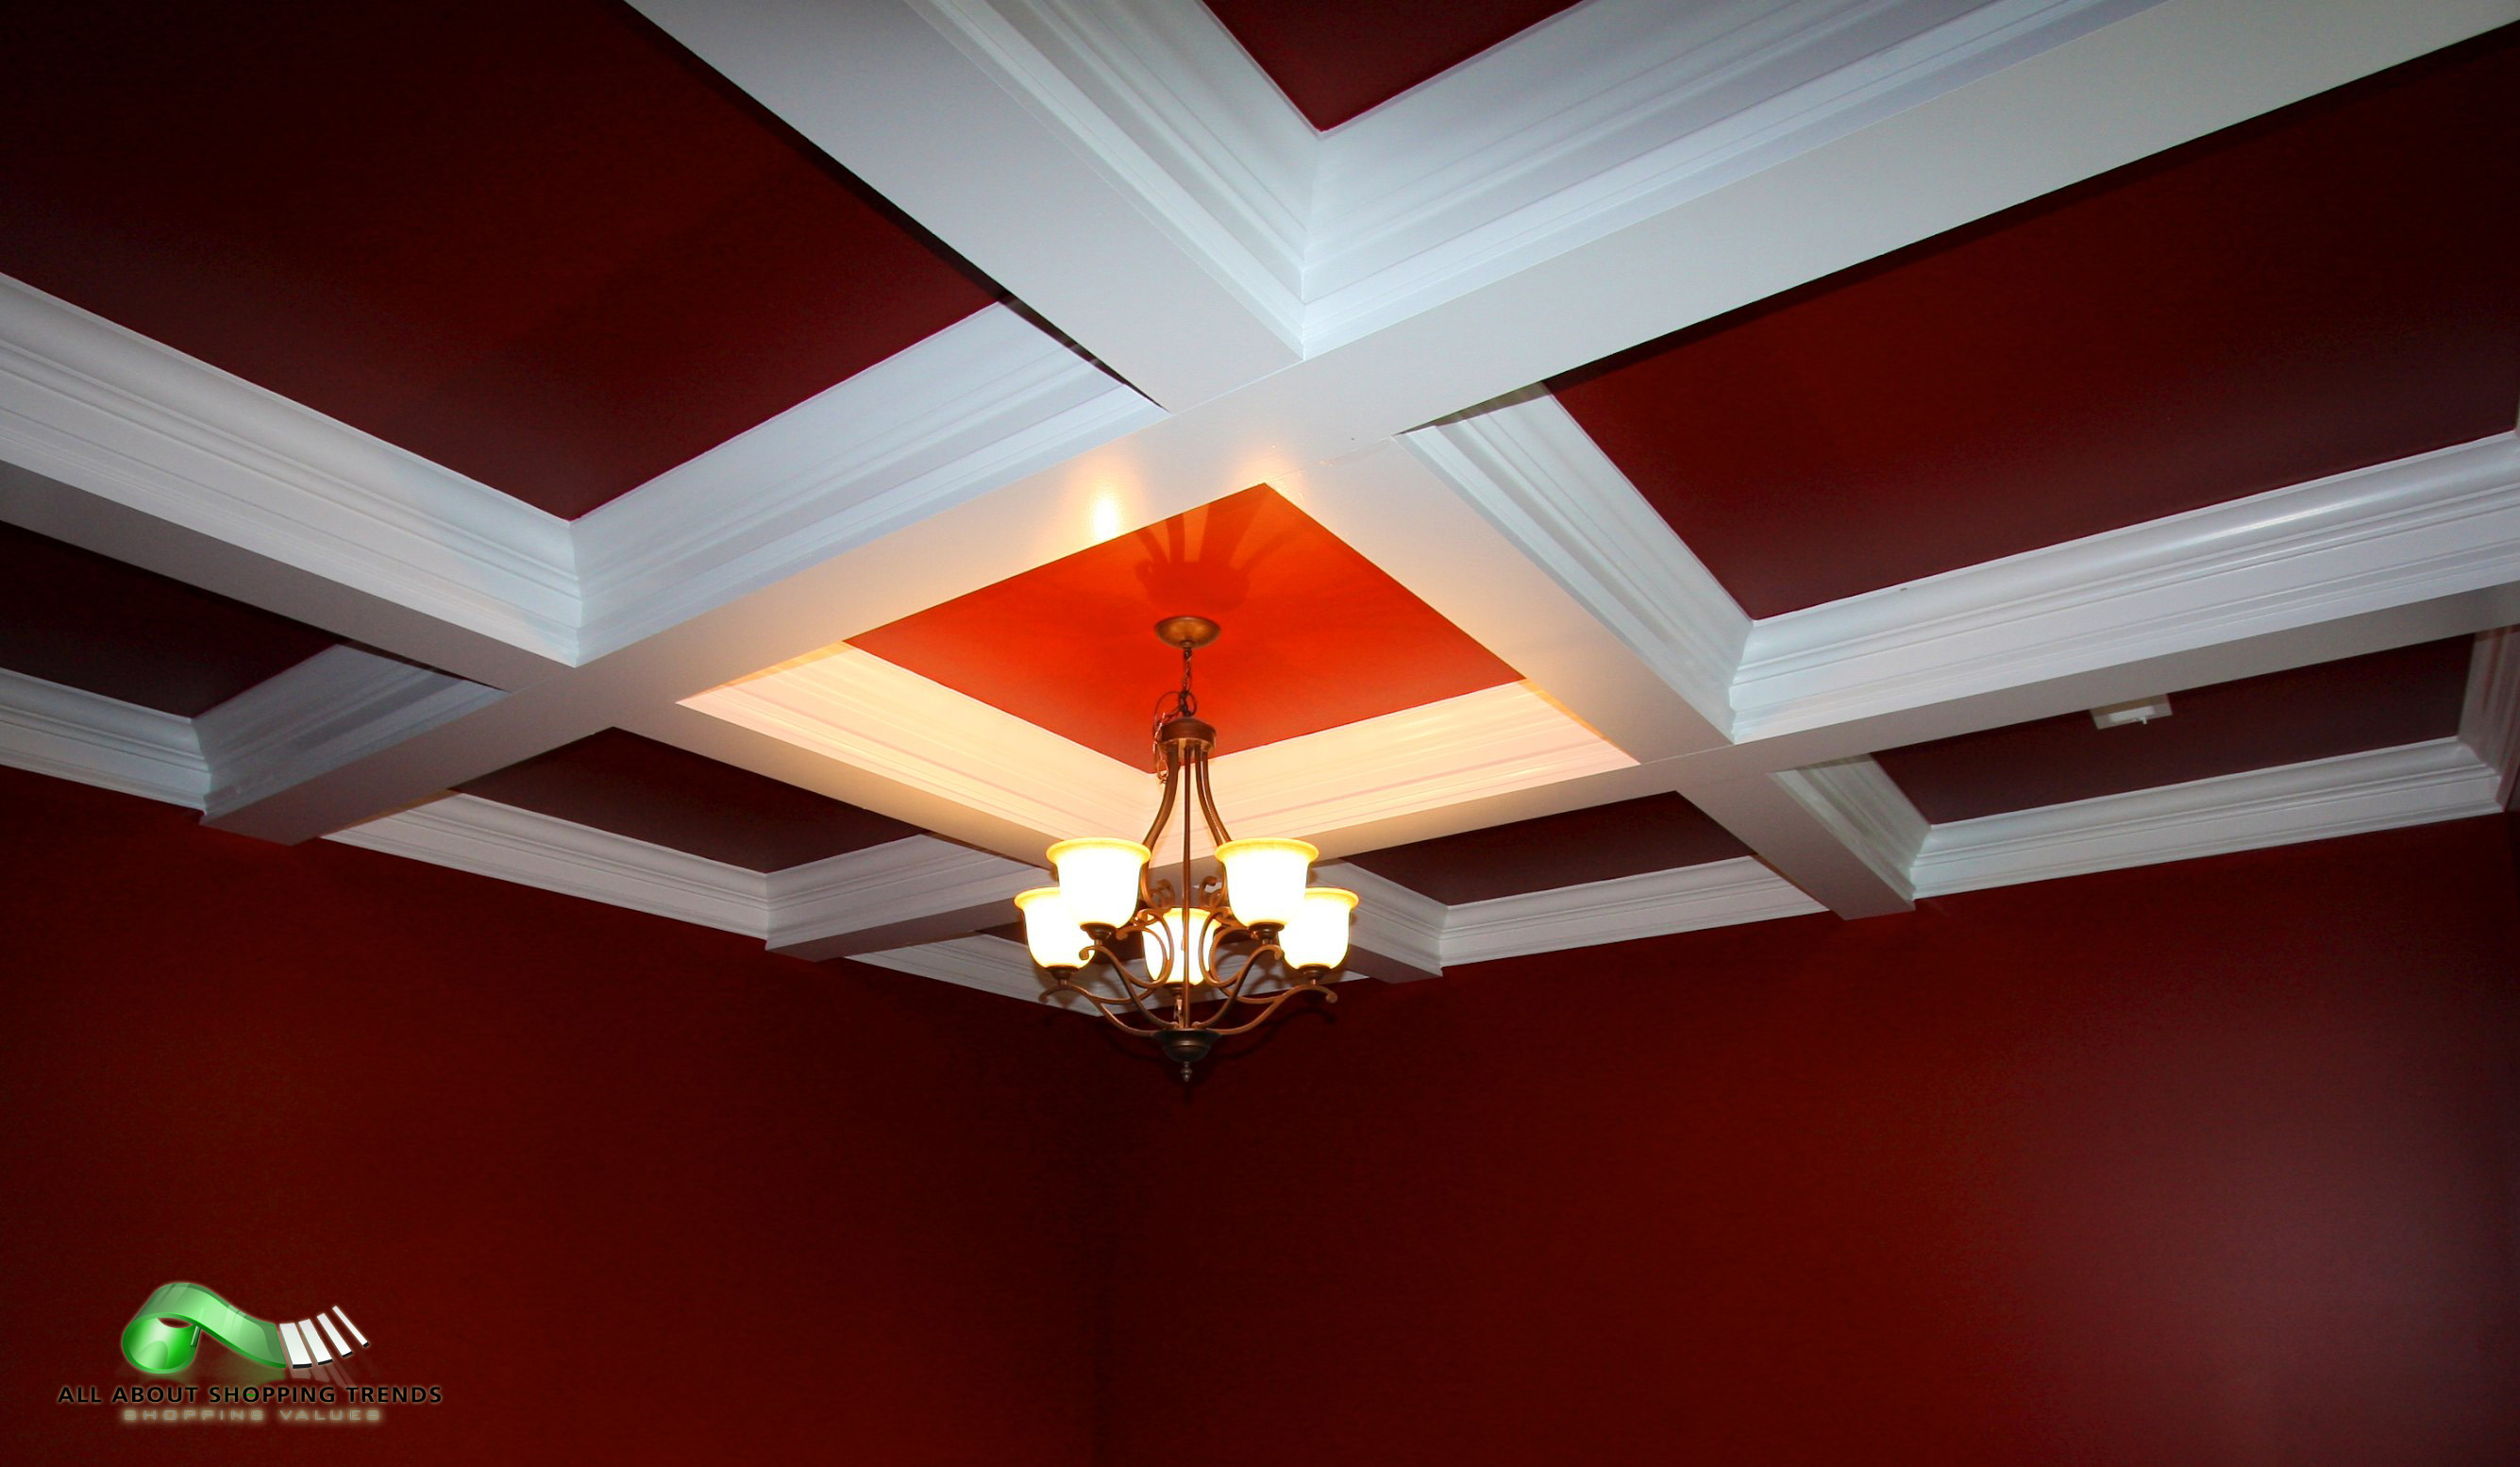 Get Coffered Ceiling For Your Place All About Shopping Trends